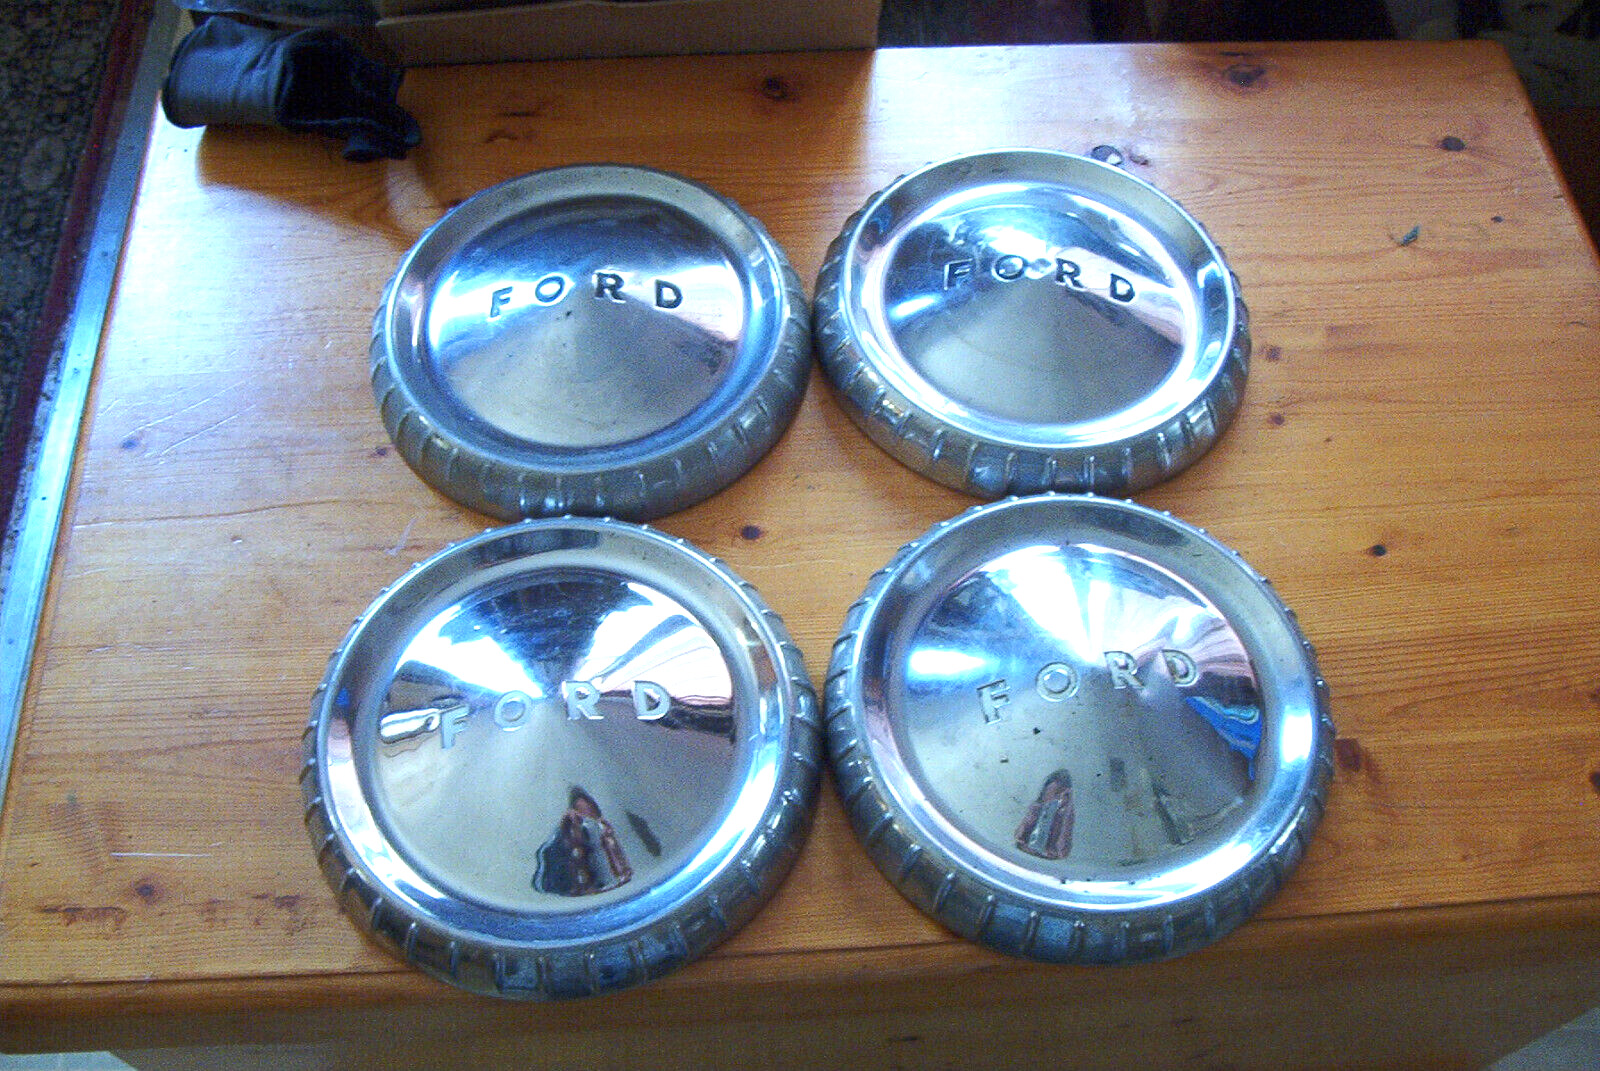 OE vintage set of 4 early 60s Ford Falcon dogdish hubcaps, imperfect survivors